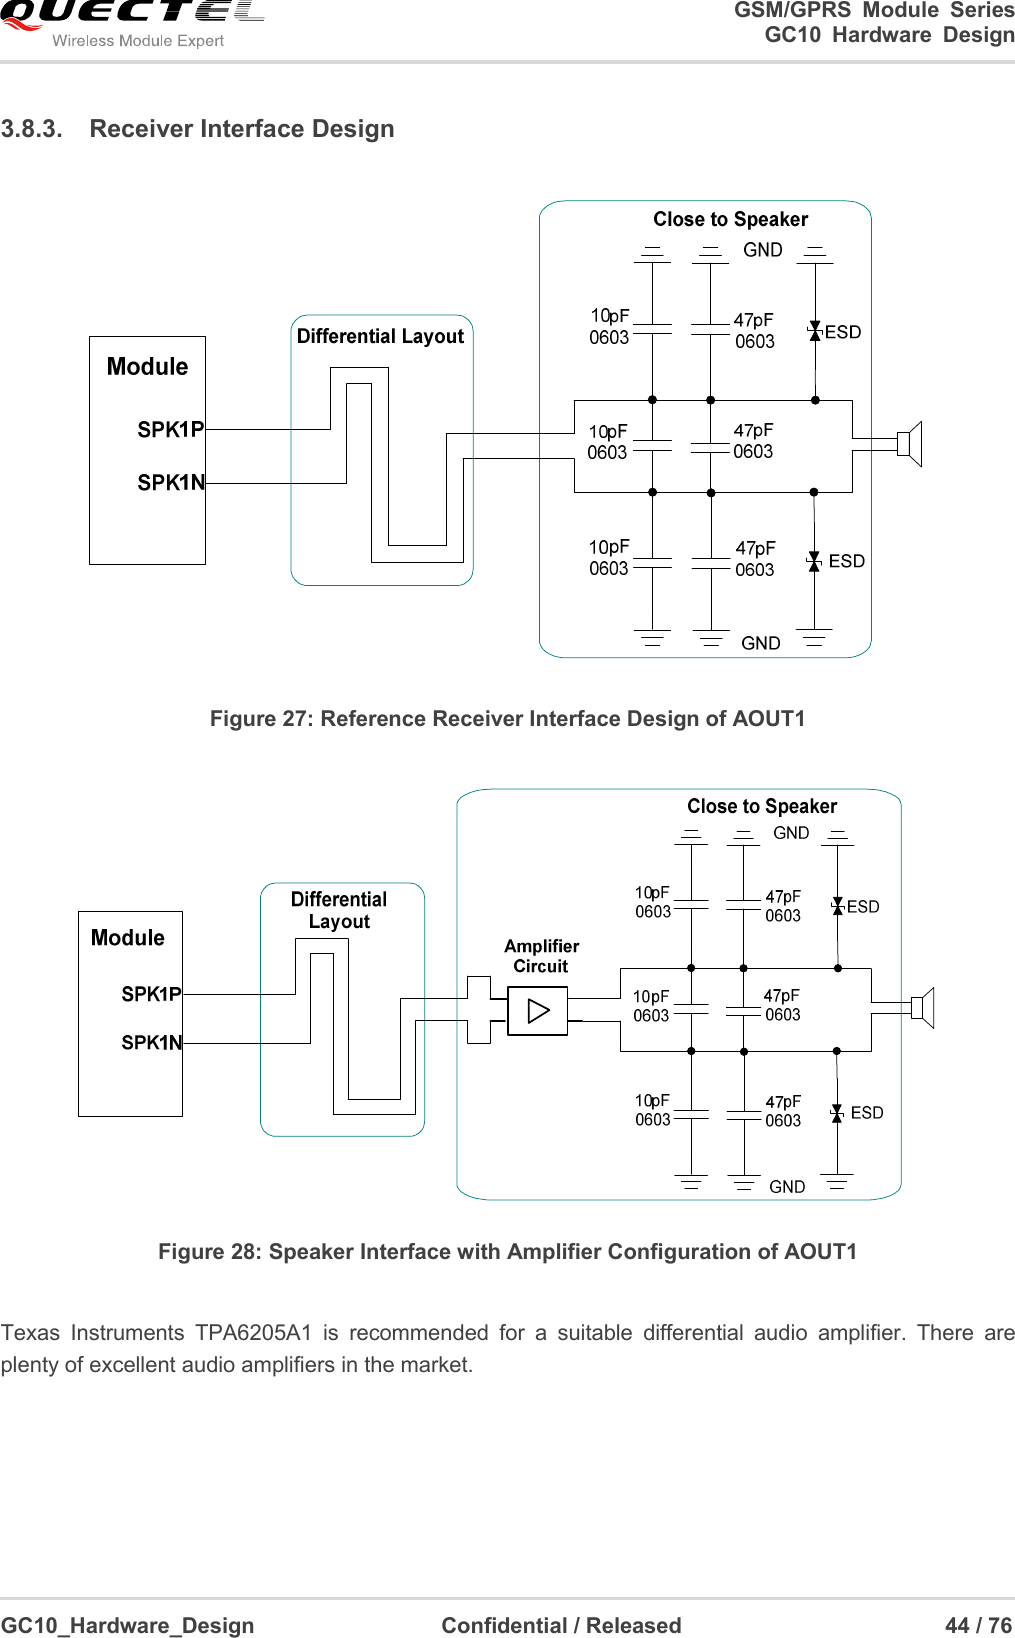                                                                          GSM/GPRS  Module  Series                                                                 GC10 Hardware Design  GC10_Hardware_Design                                  Confidential / Released                                                44 / 76      3.8.3.  Receiver Interface Design  Figure 27: Reference Receiver Interface Design of AOUT1  Figure 28: Speaker Interface with Amplifier Configuration of AOUT1  Texas  Instruments  TPA6205A1  is  recommended  for  a  suitable  differential  audio  amplifier.  There  are plenty of excellent audio amplifiers in the market.    